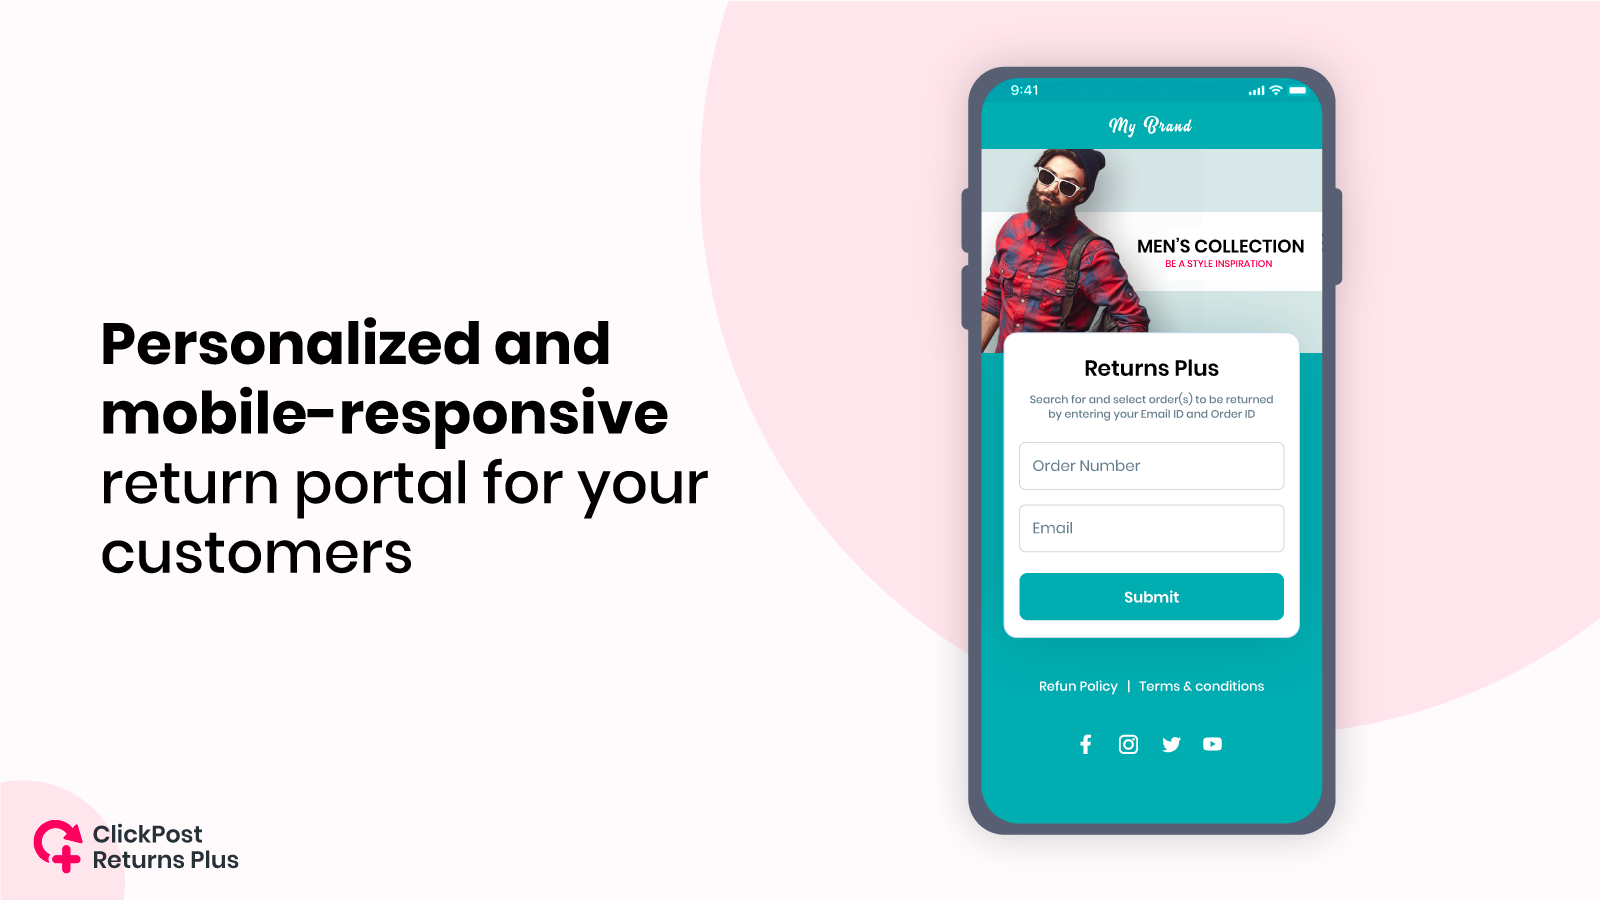 Personalized and mobile-responsive return portal